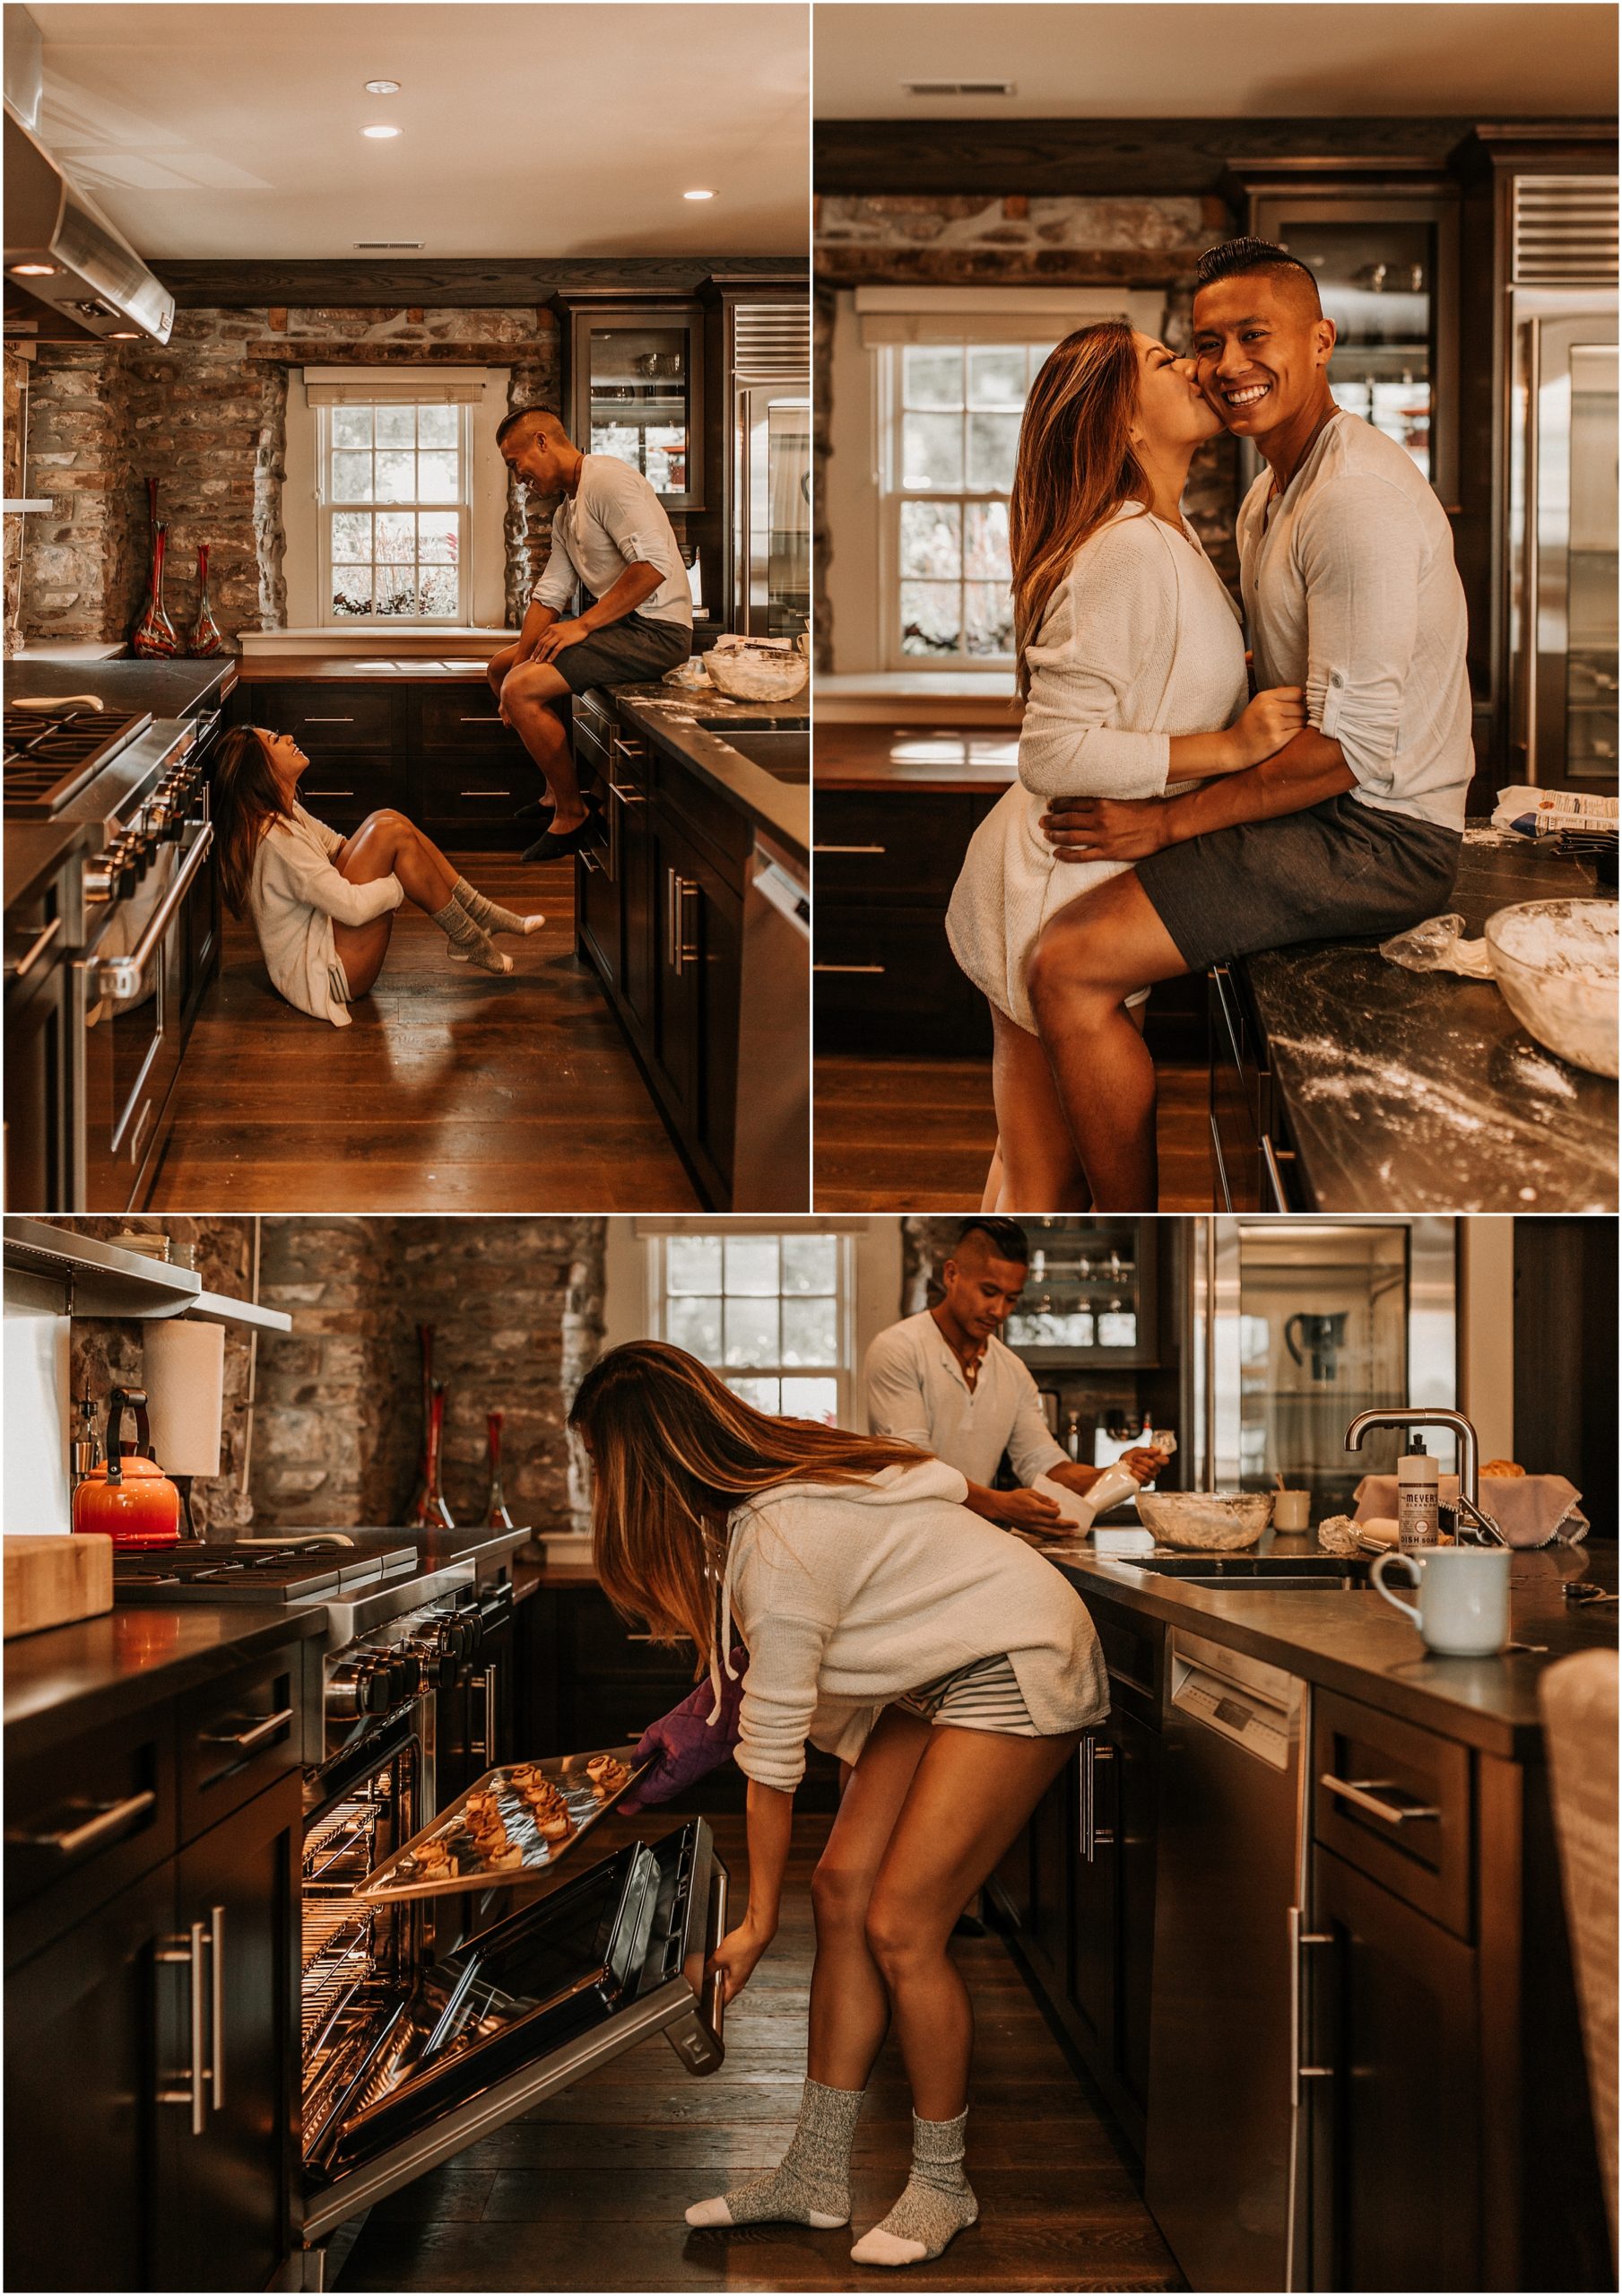 In-Home Baking Couples Session at The Carriage House of New Hope, PA